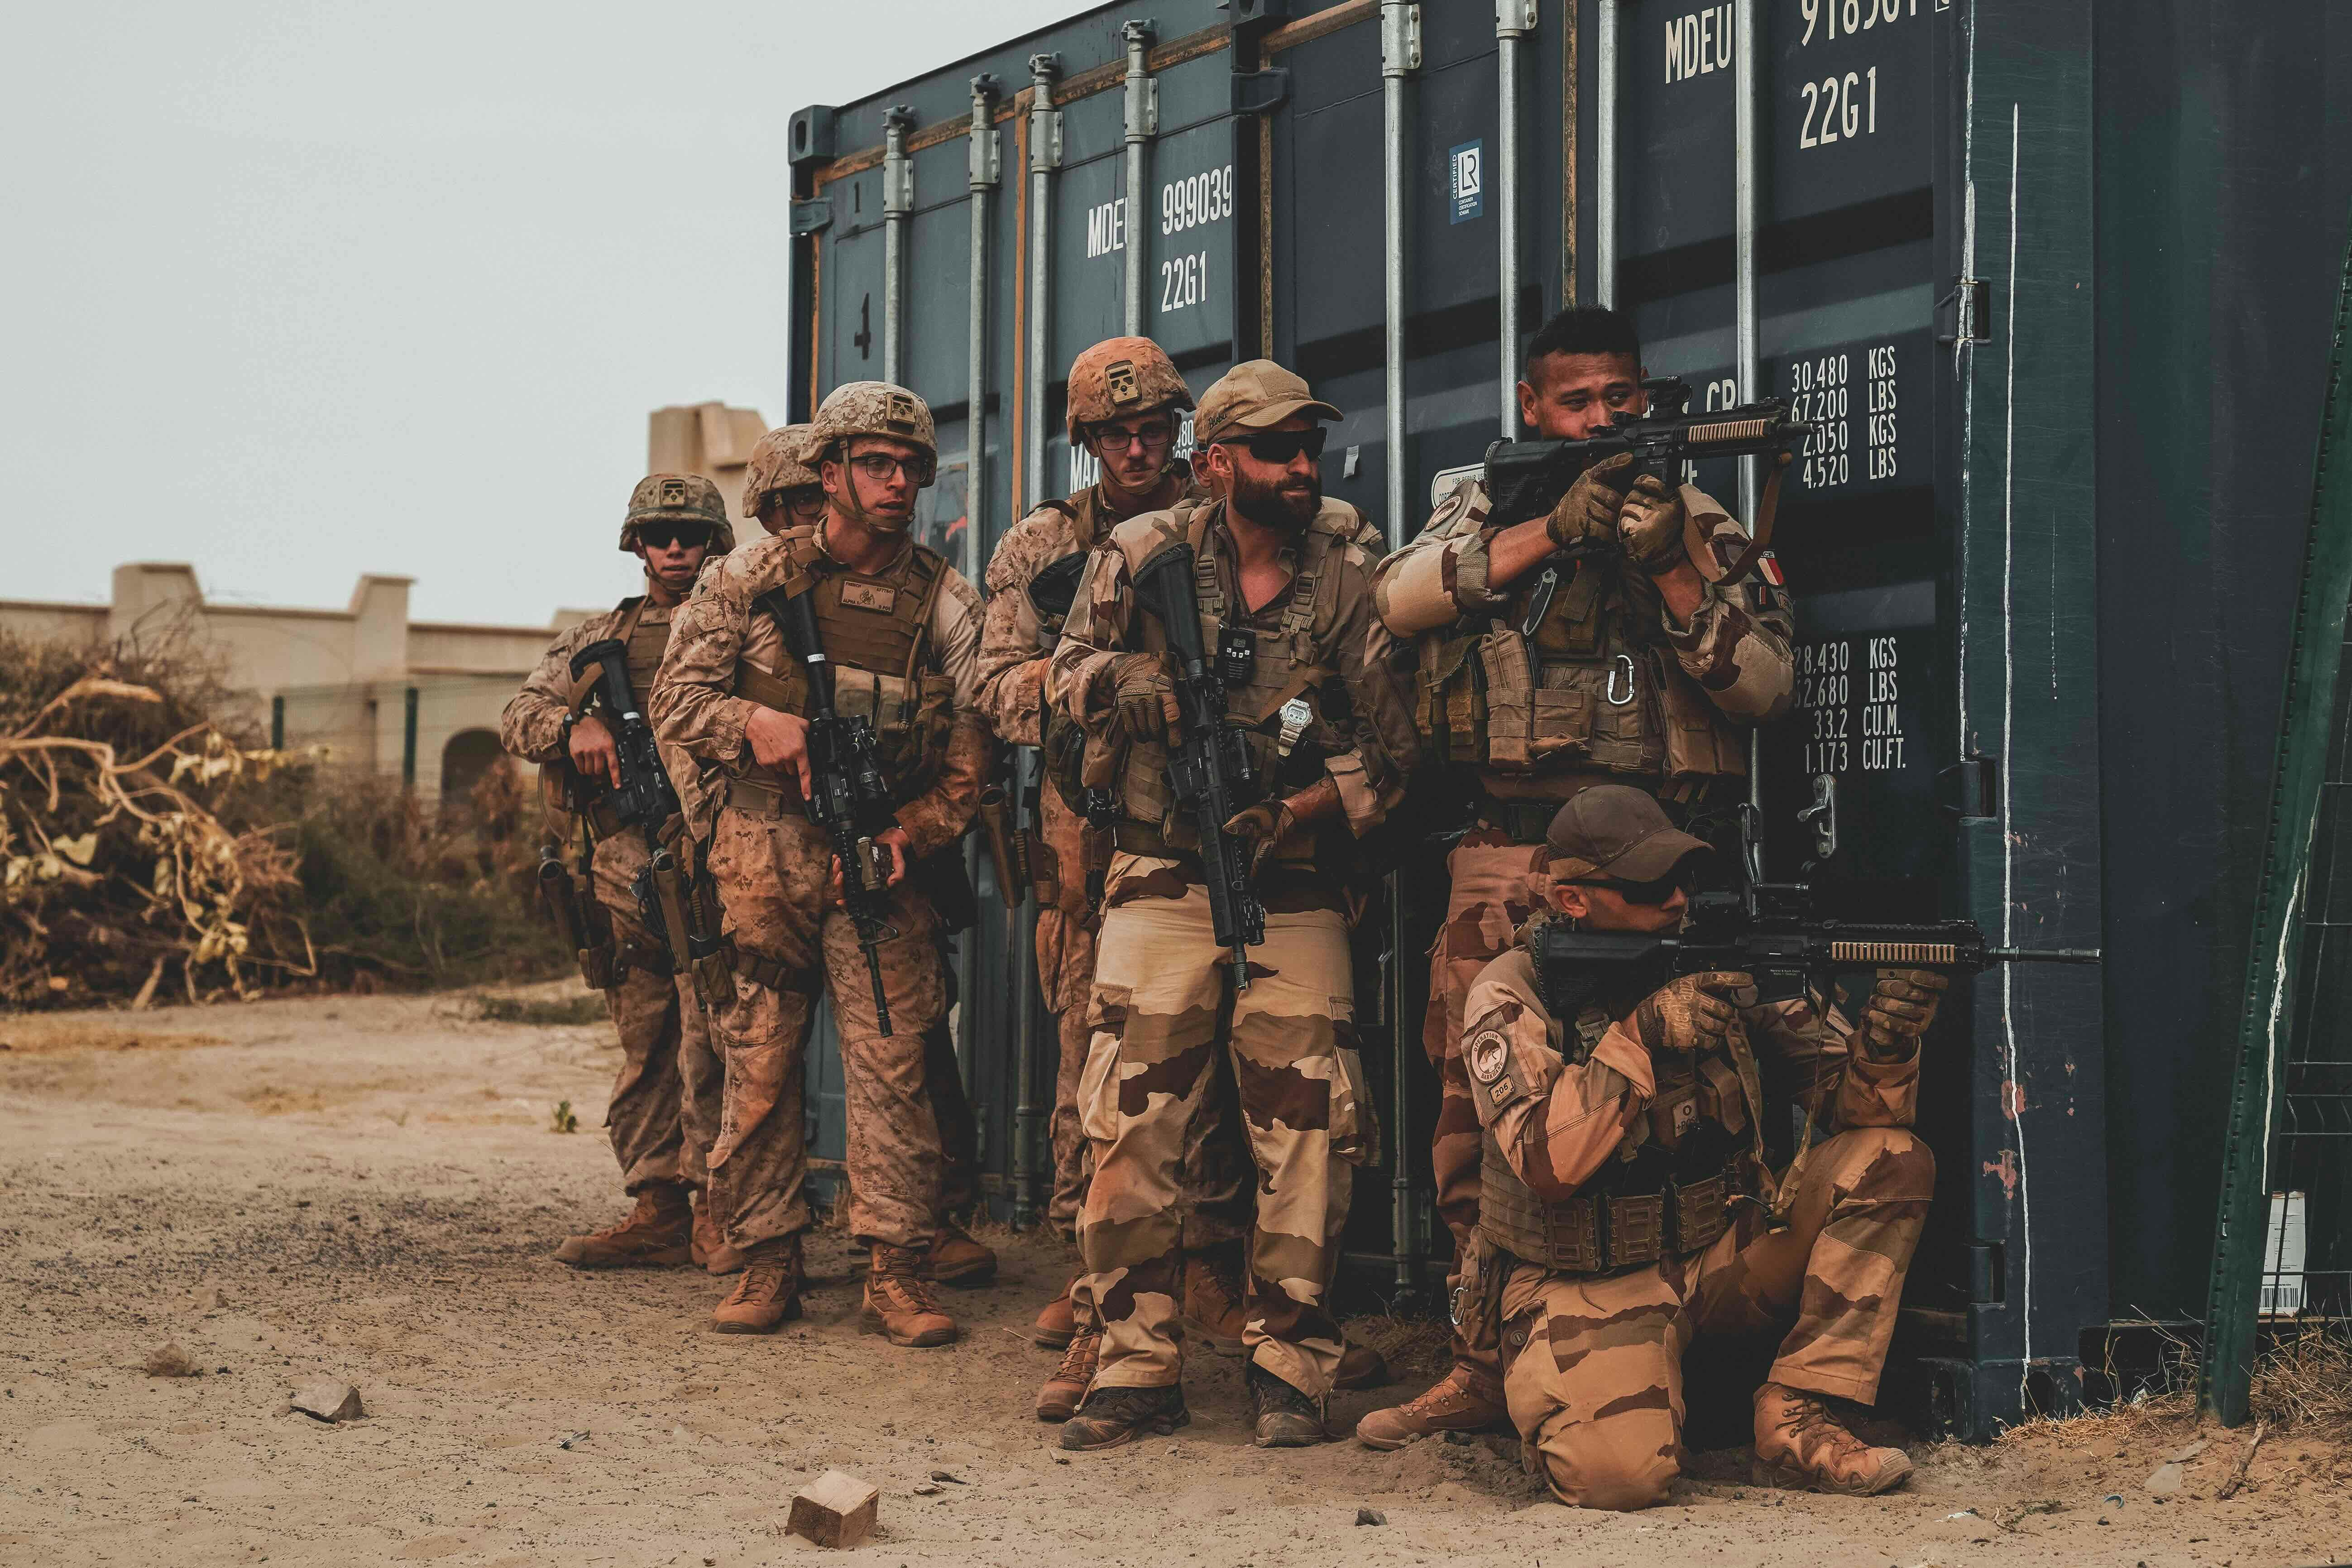 U.S. Marines with Fleet Anti-terrorism Security Company, Europe (FASTEUR), Commander, Task Force - 68 (CTF-68), and French armed forces soldiers conduct Military Operations in Urban Terrain (MOUT) training during a joint forces readiness exercise in Timbuktu, Mali